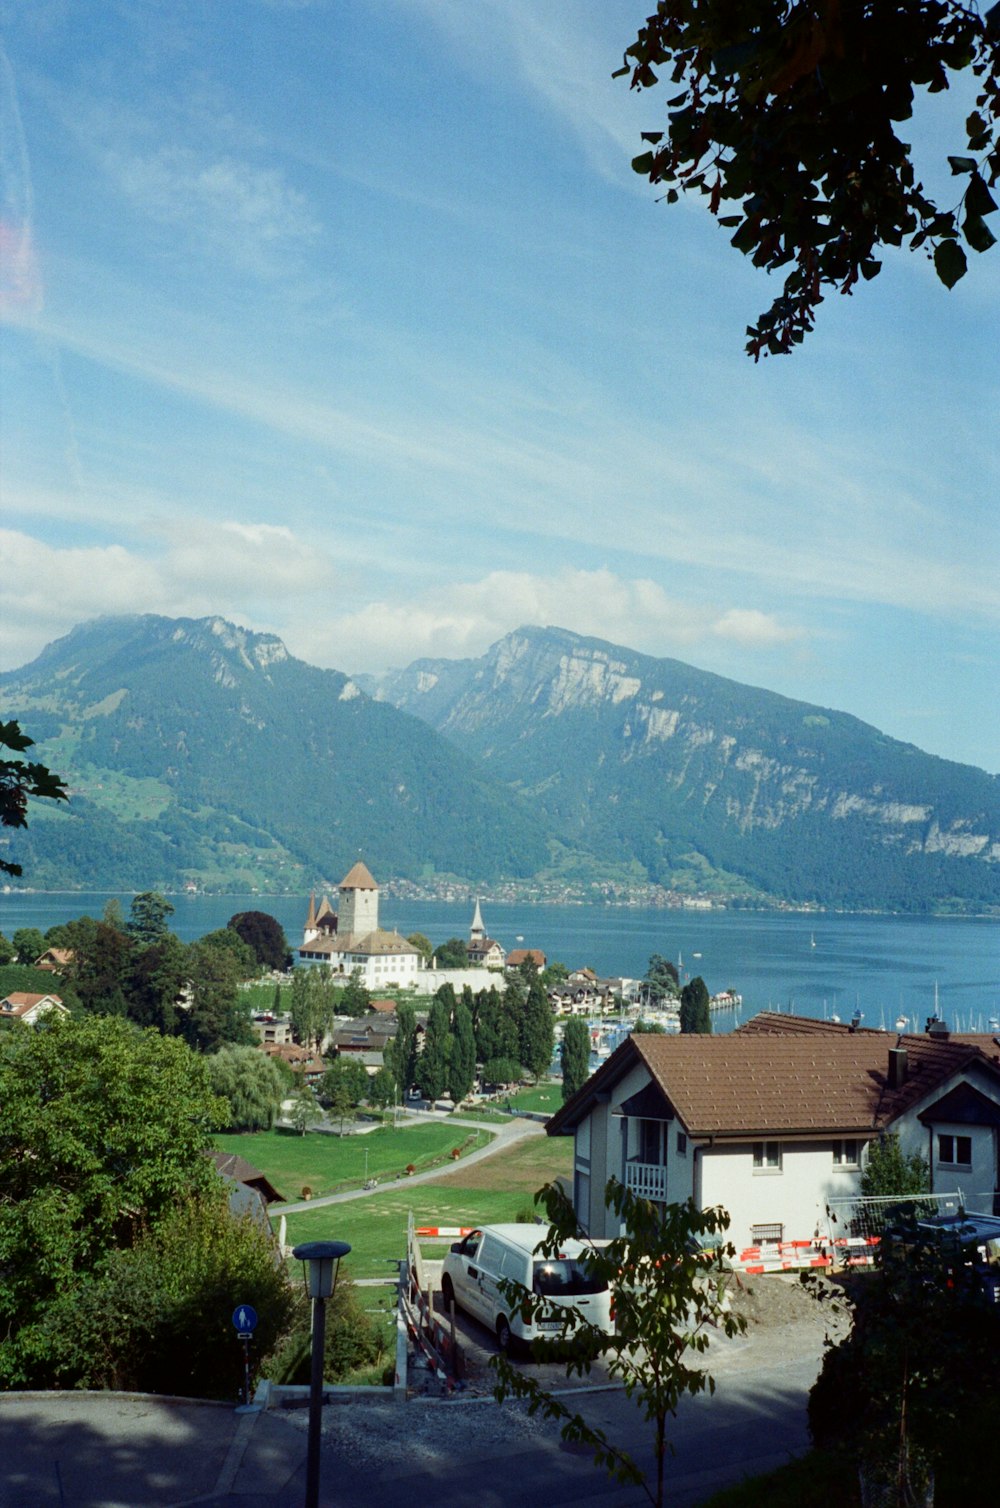 a scenic view of a town and a body of water